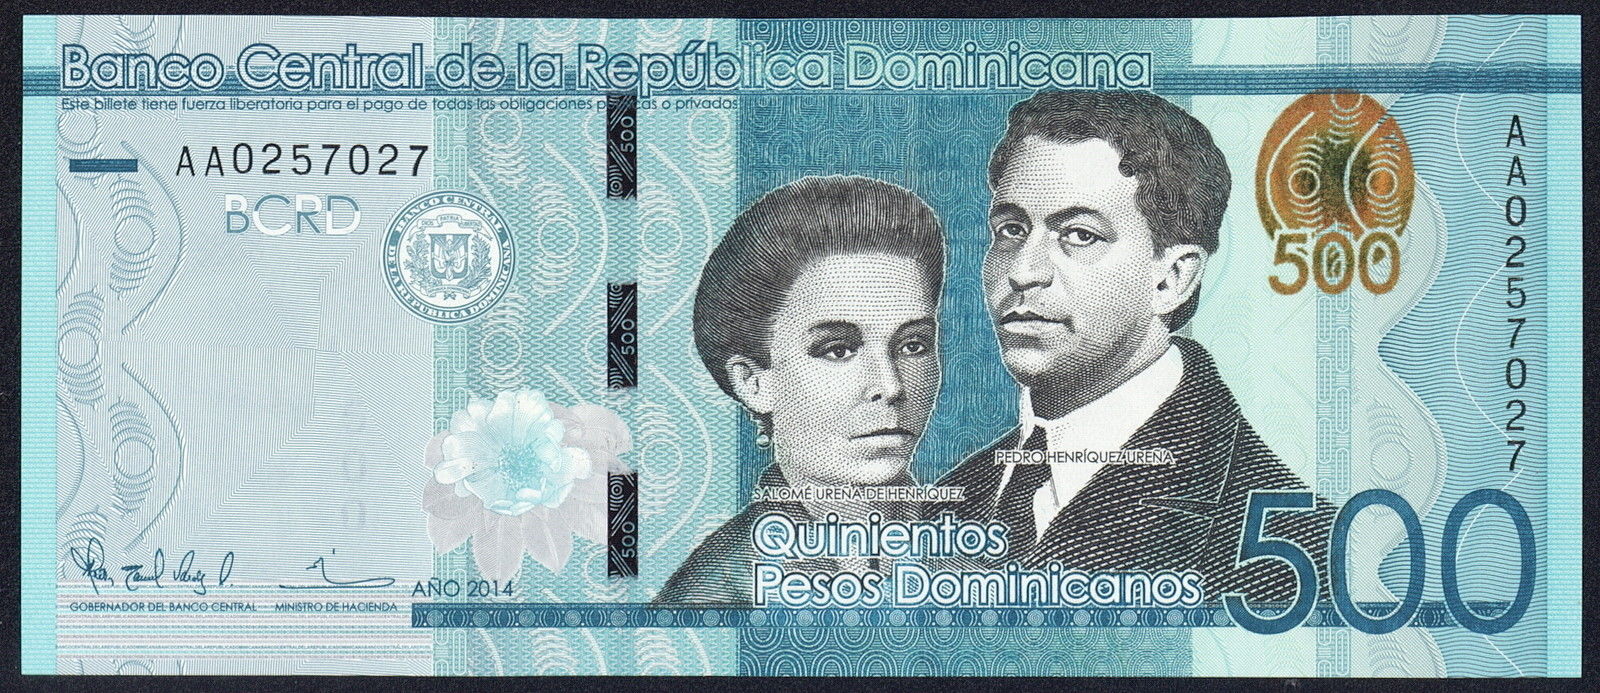 Dominican Republic 500 Pesos Dominicanos Banknote 2014 World Banknotes And Coins Pictures Old